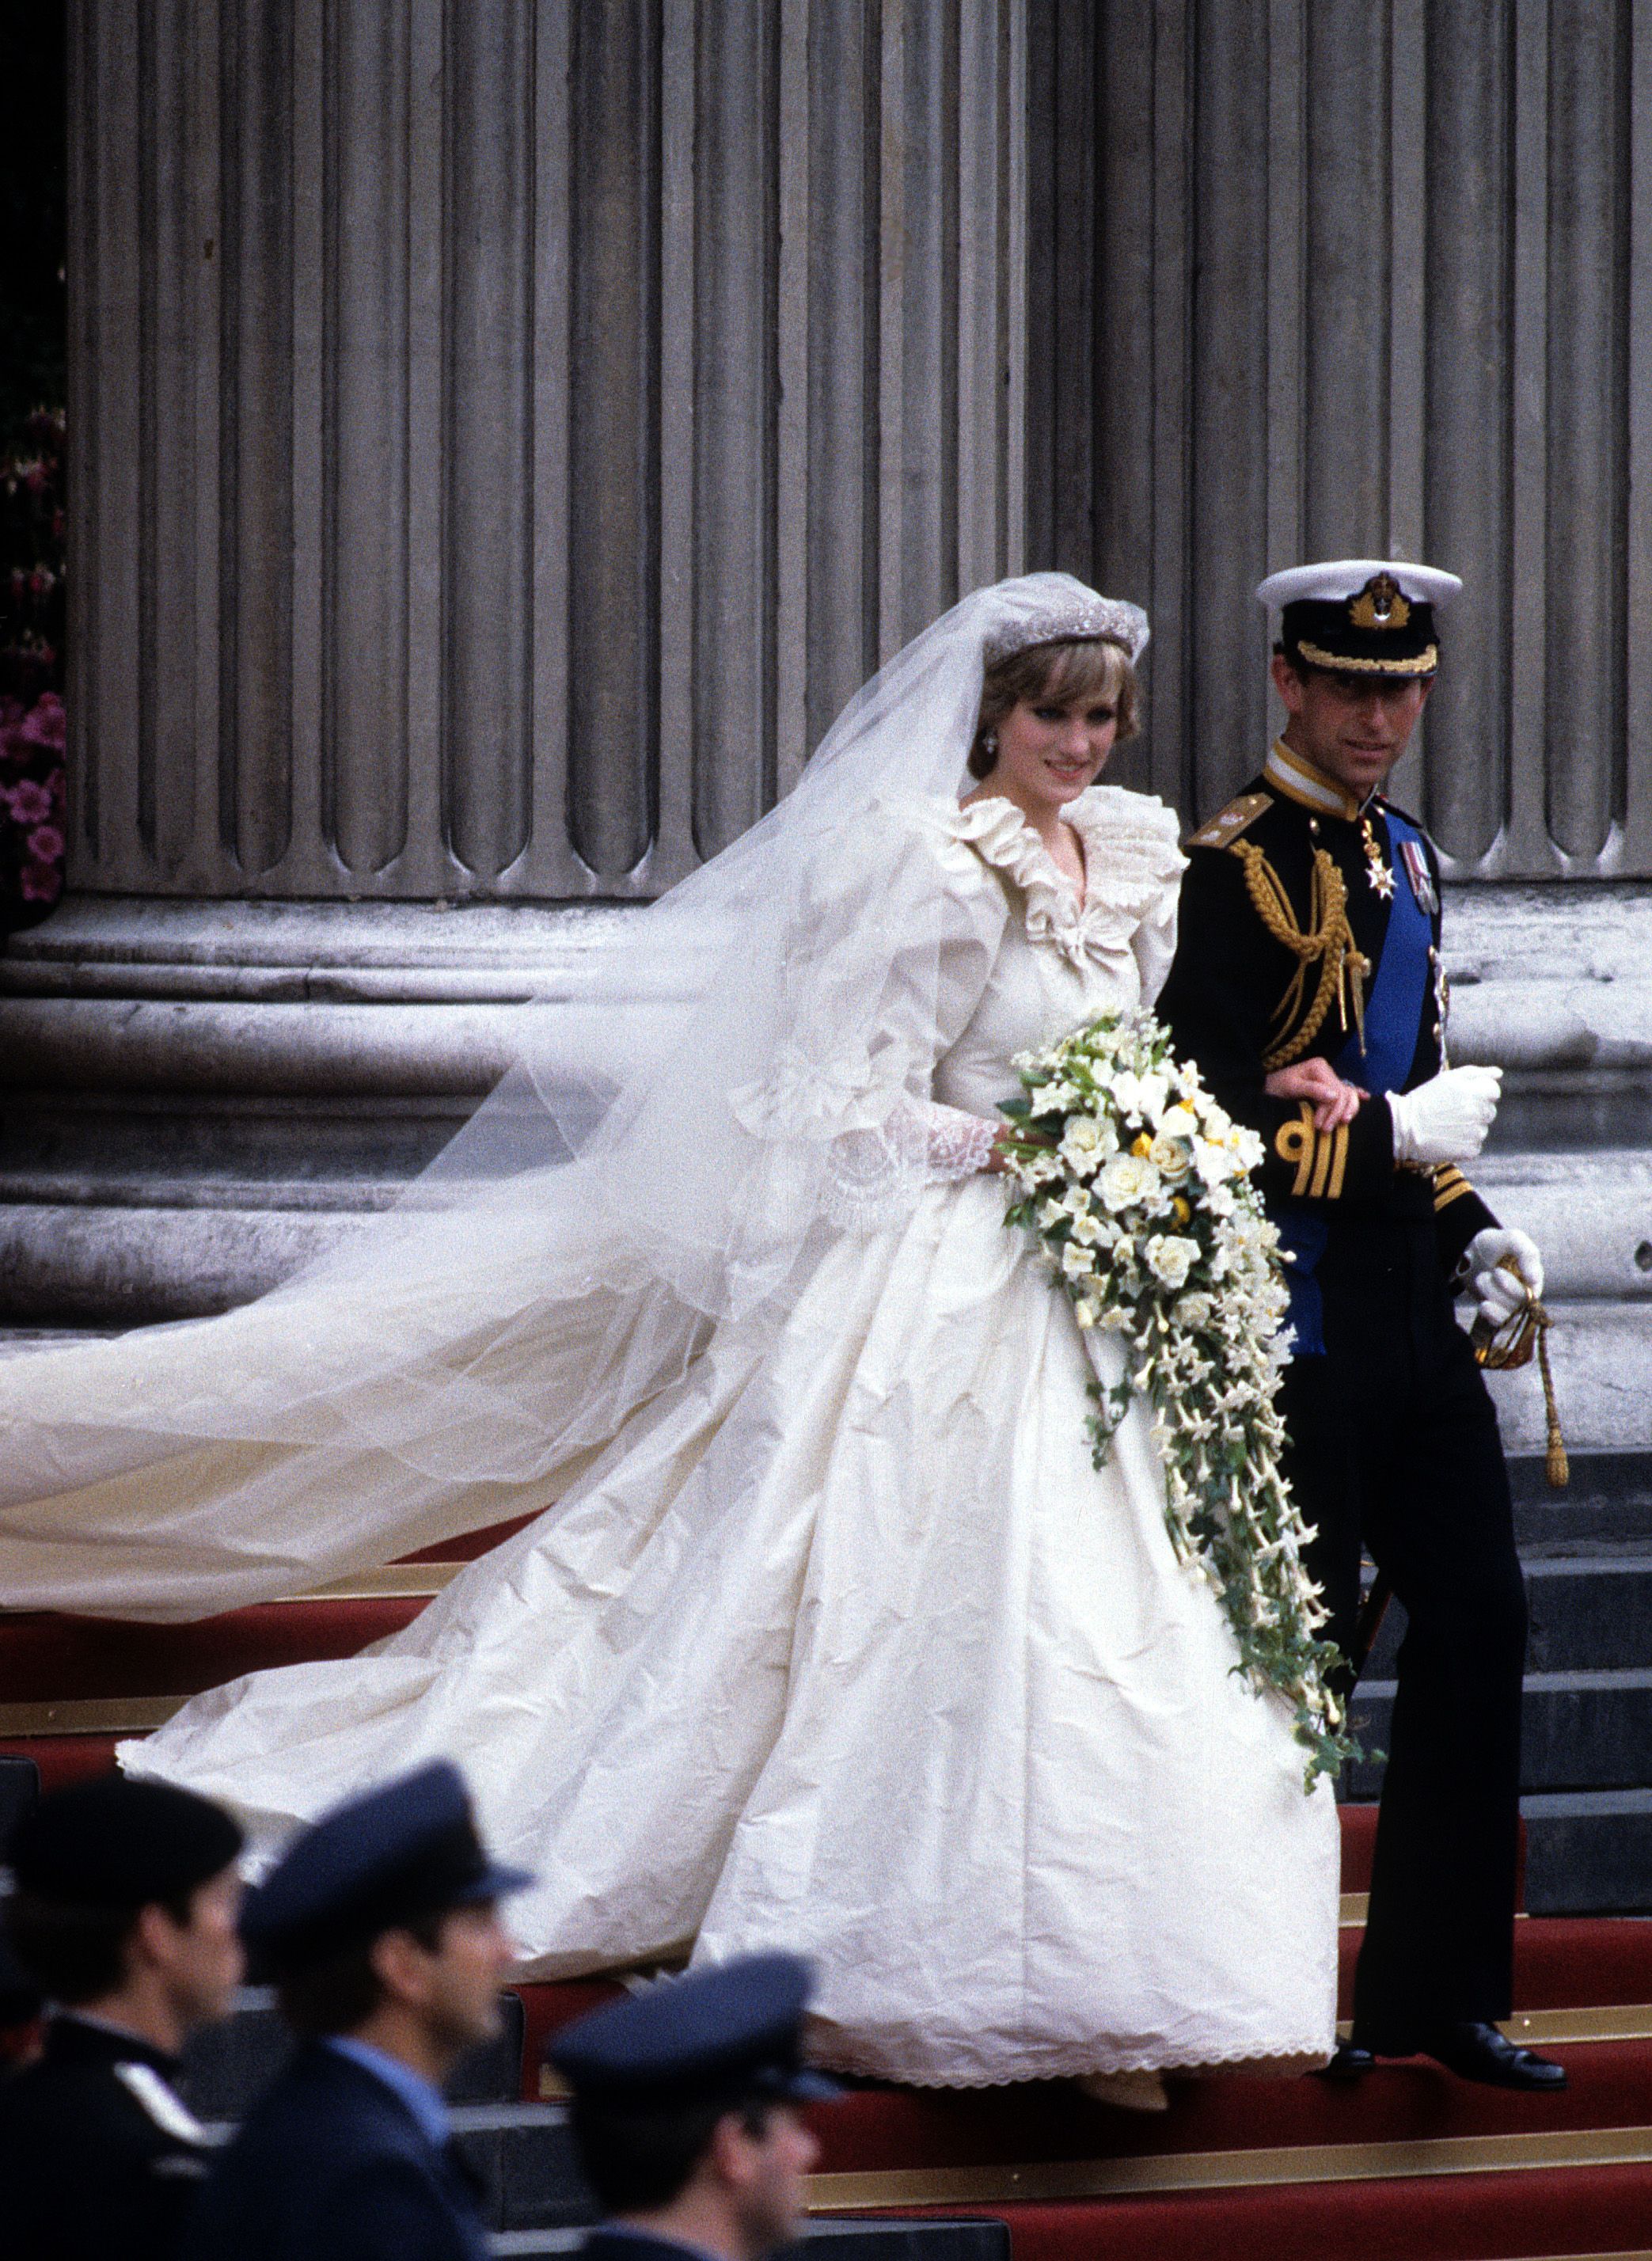 https://hips.hearstapps.com/hmg-prod/images/princess-diana-and-prince-charles-of-wales-wedding-dress-1516606110.jpg